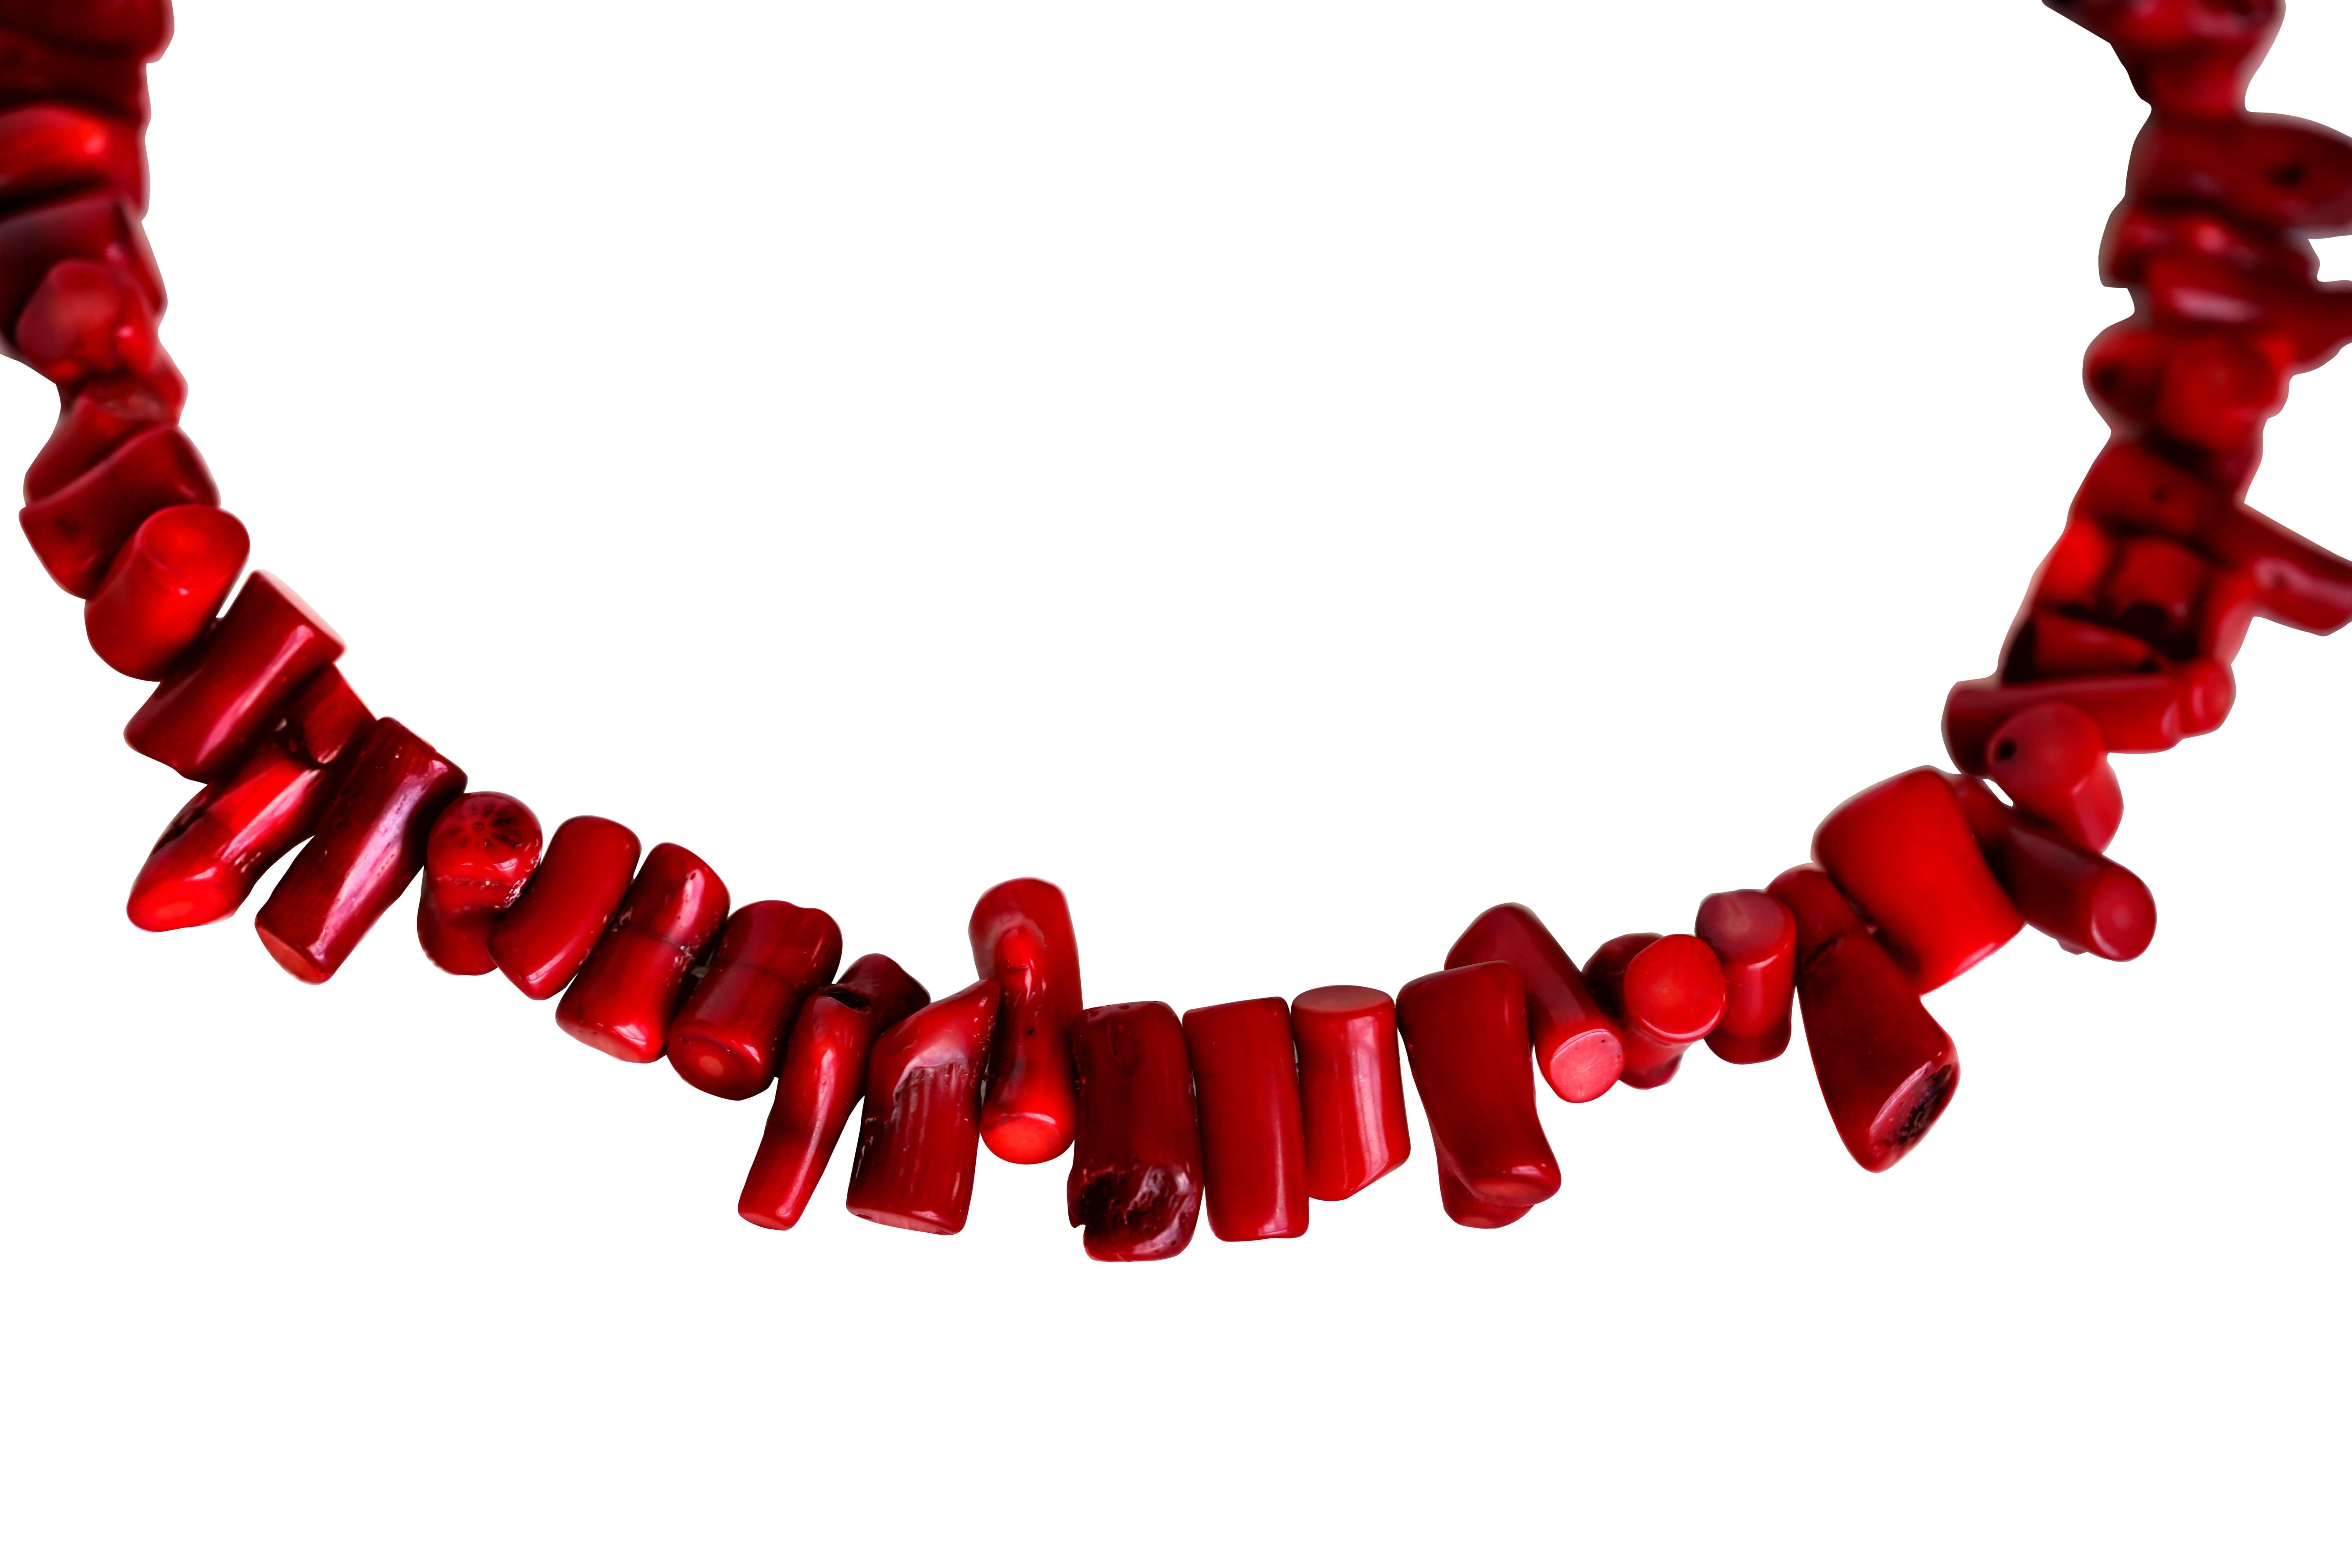 63 irregular natural red coral necklace. Each natural red coral is uniquely shaped.
Necklace length: 19.7 inches/50 cm.
Coral length range: 7.41 to 19.88 mm.
Coral width range: 4.45 to 13.41 mm.
Thickness range: 7.26 to 8 mm.
Total weight: 116